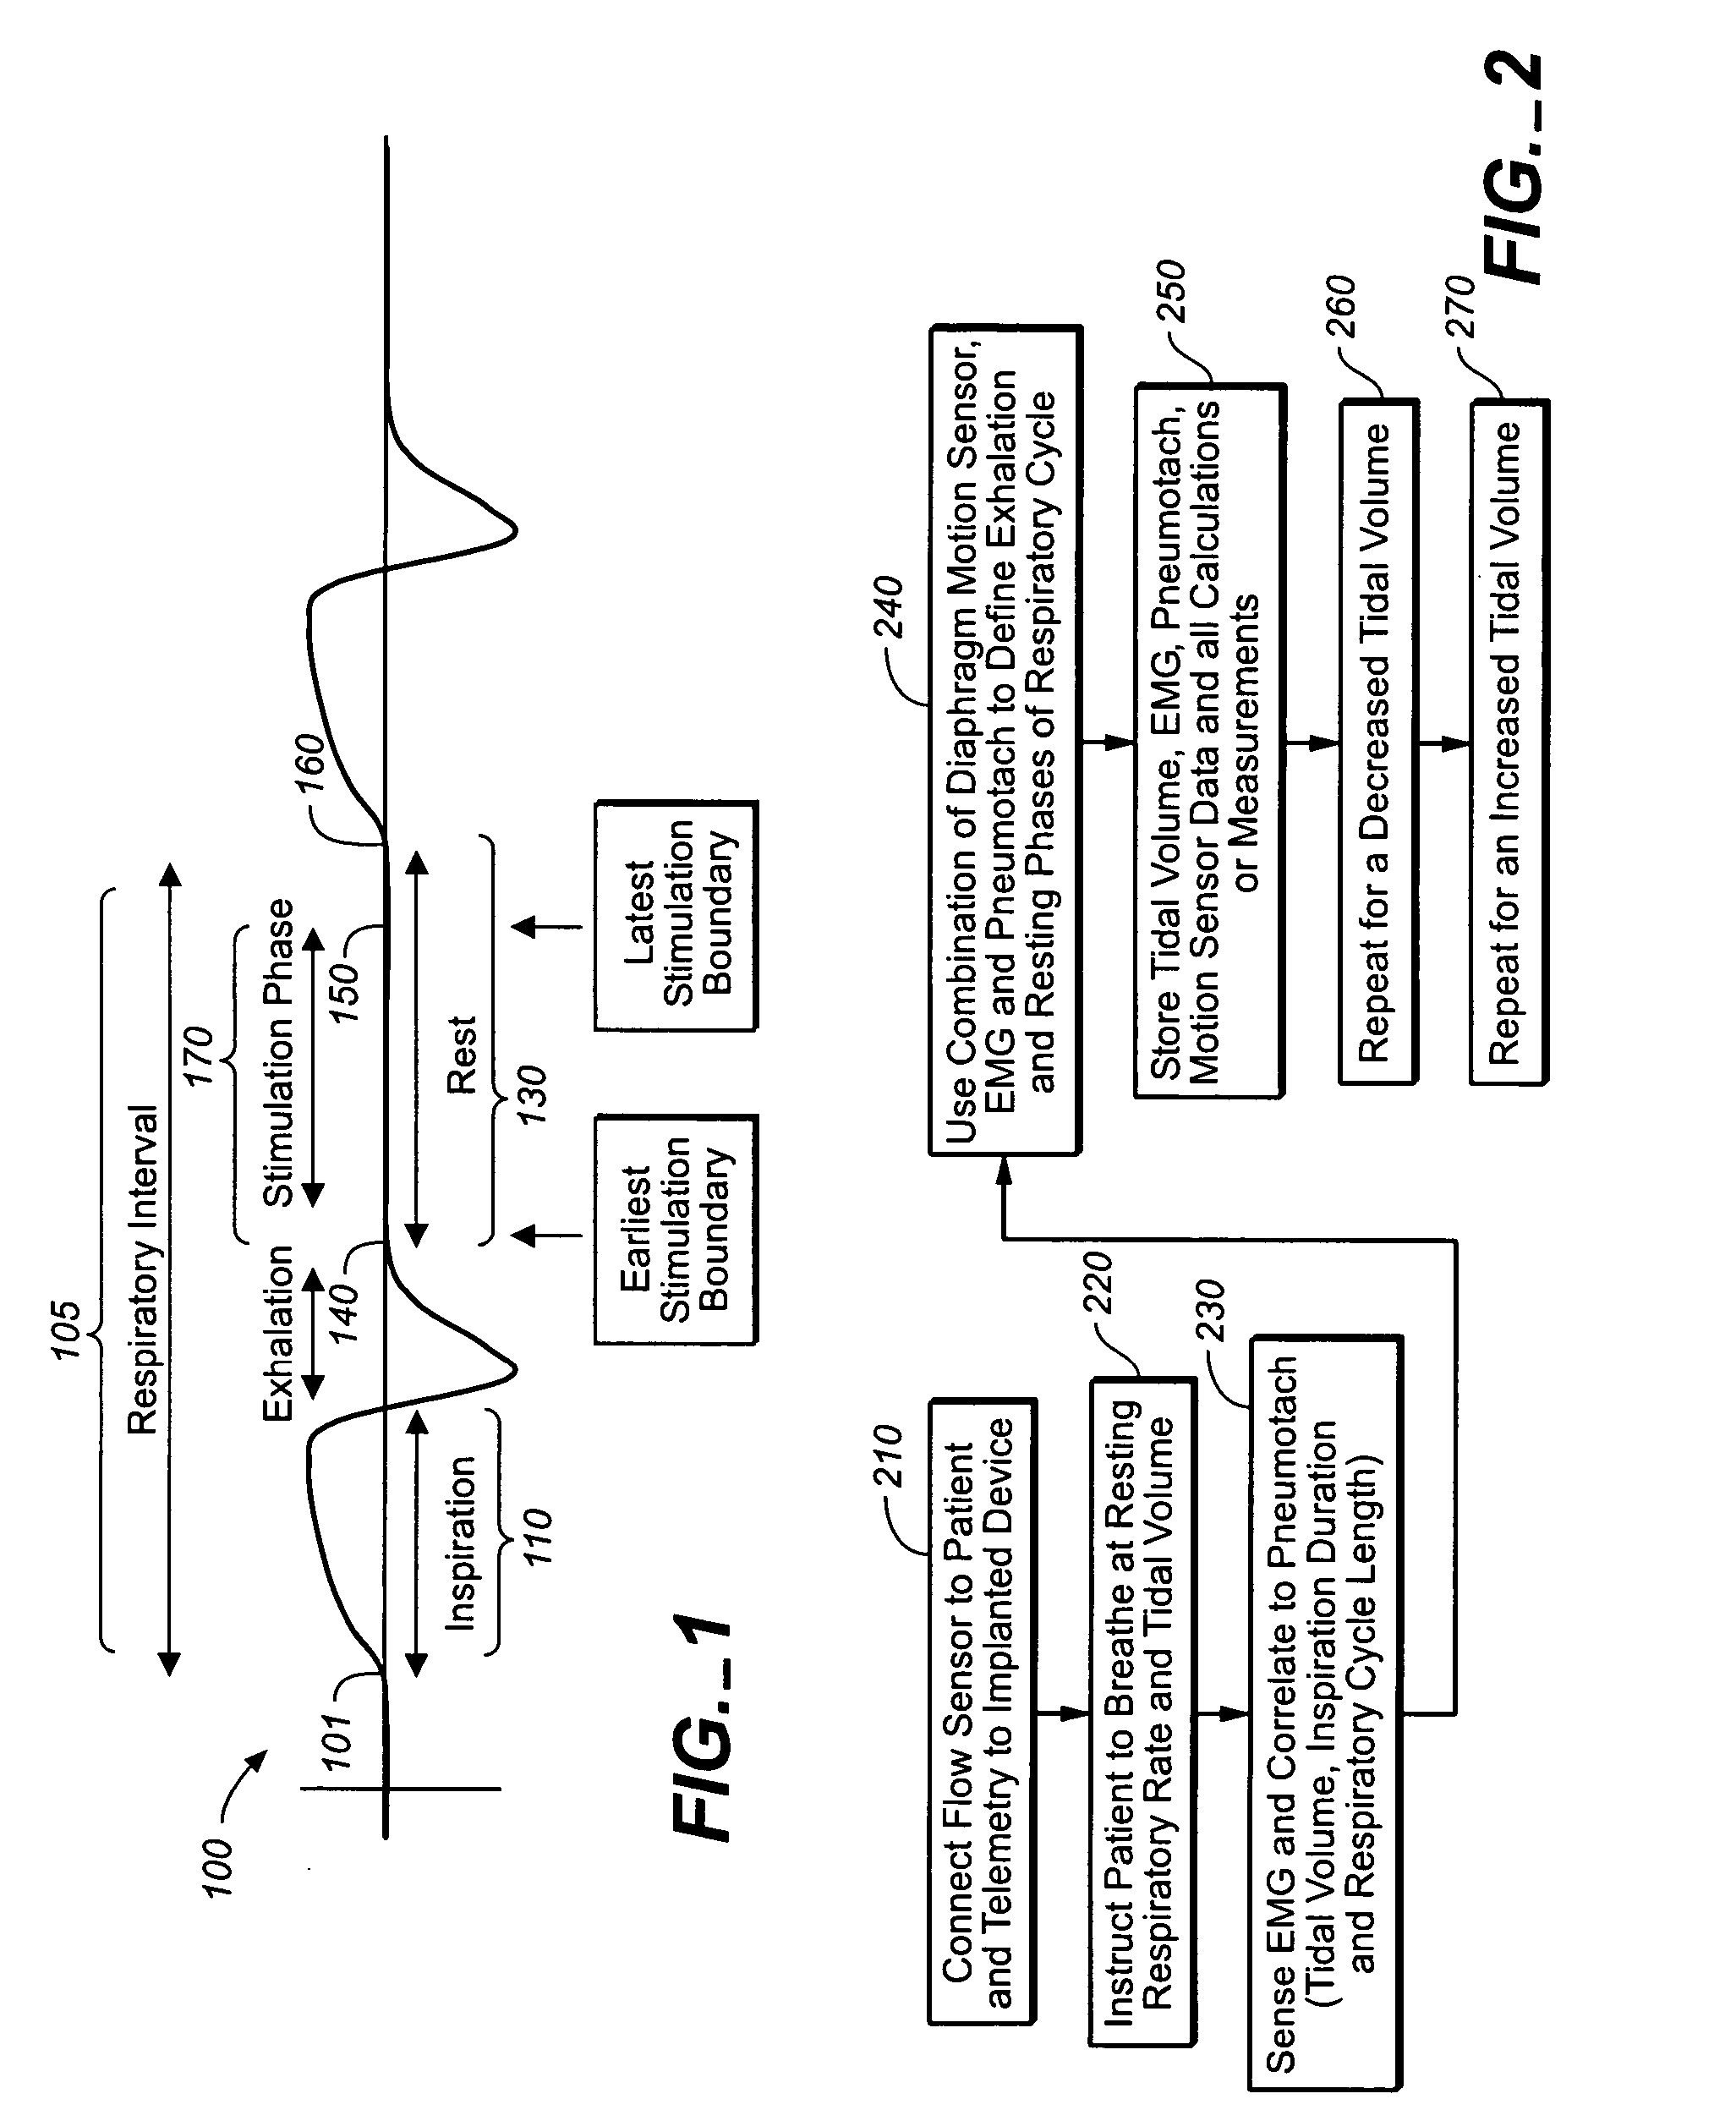 Breathing therapy device and method